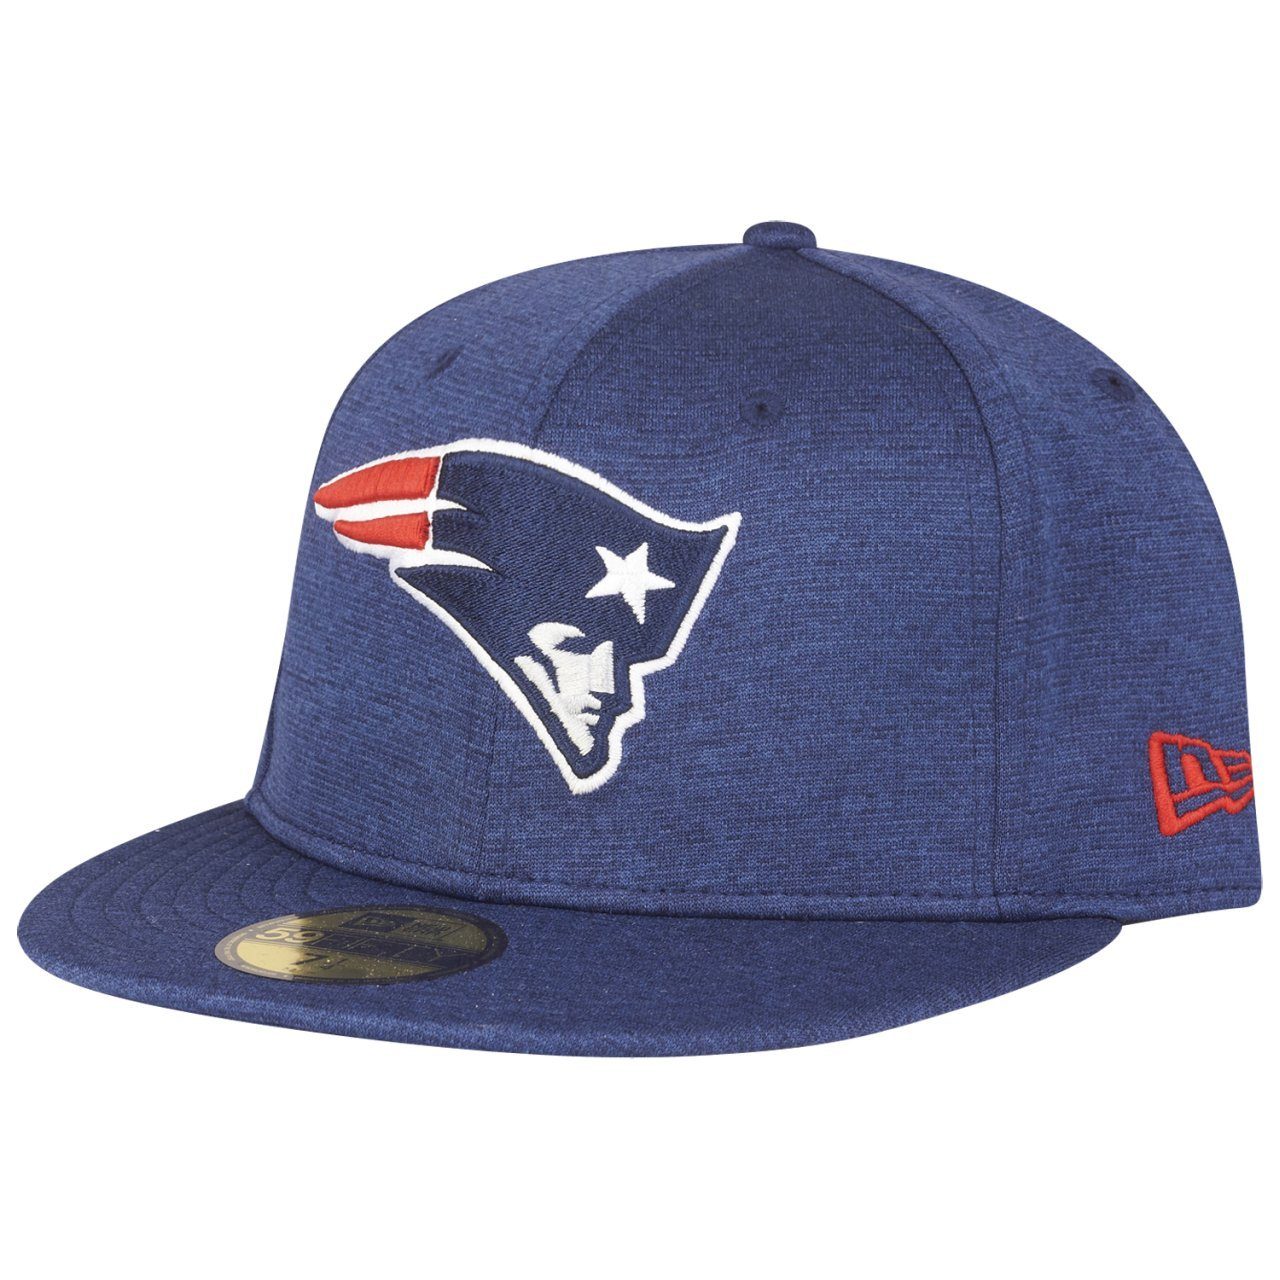 New Era Fitted Cap 59Fifty SHADOW TECH New England Patriots